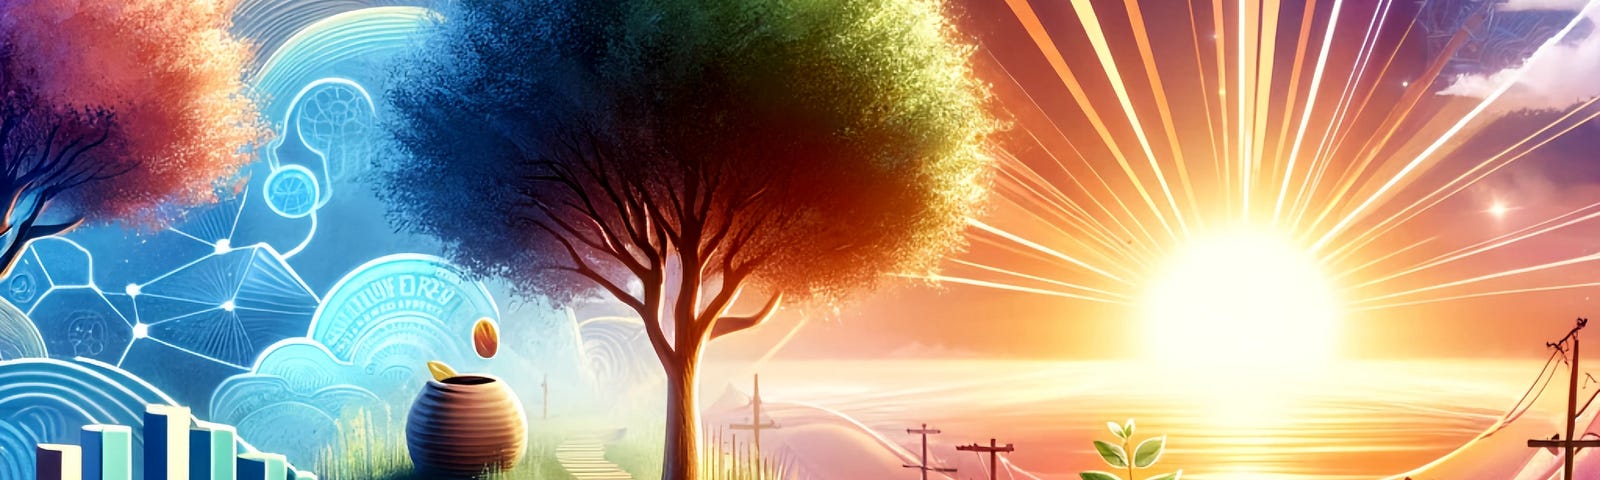 A vibrant image symbolizing the journey to financial freedom, with a path leading towards a sunrise, a flourishing tree, and a piggy bank, representing growth, stability, and prosperity.